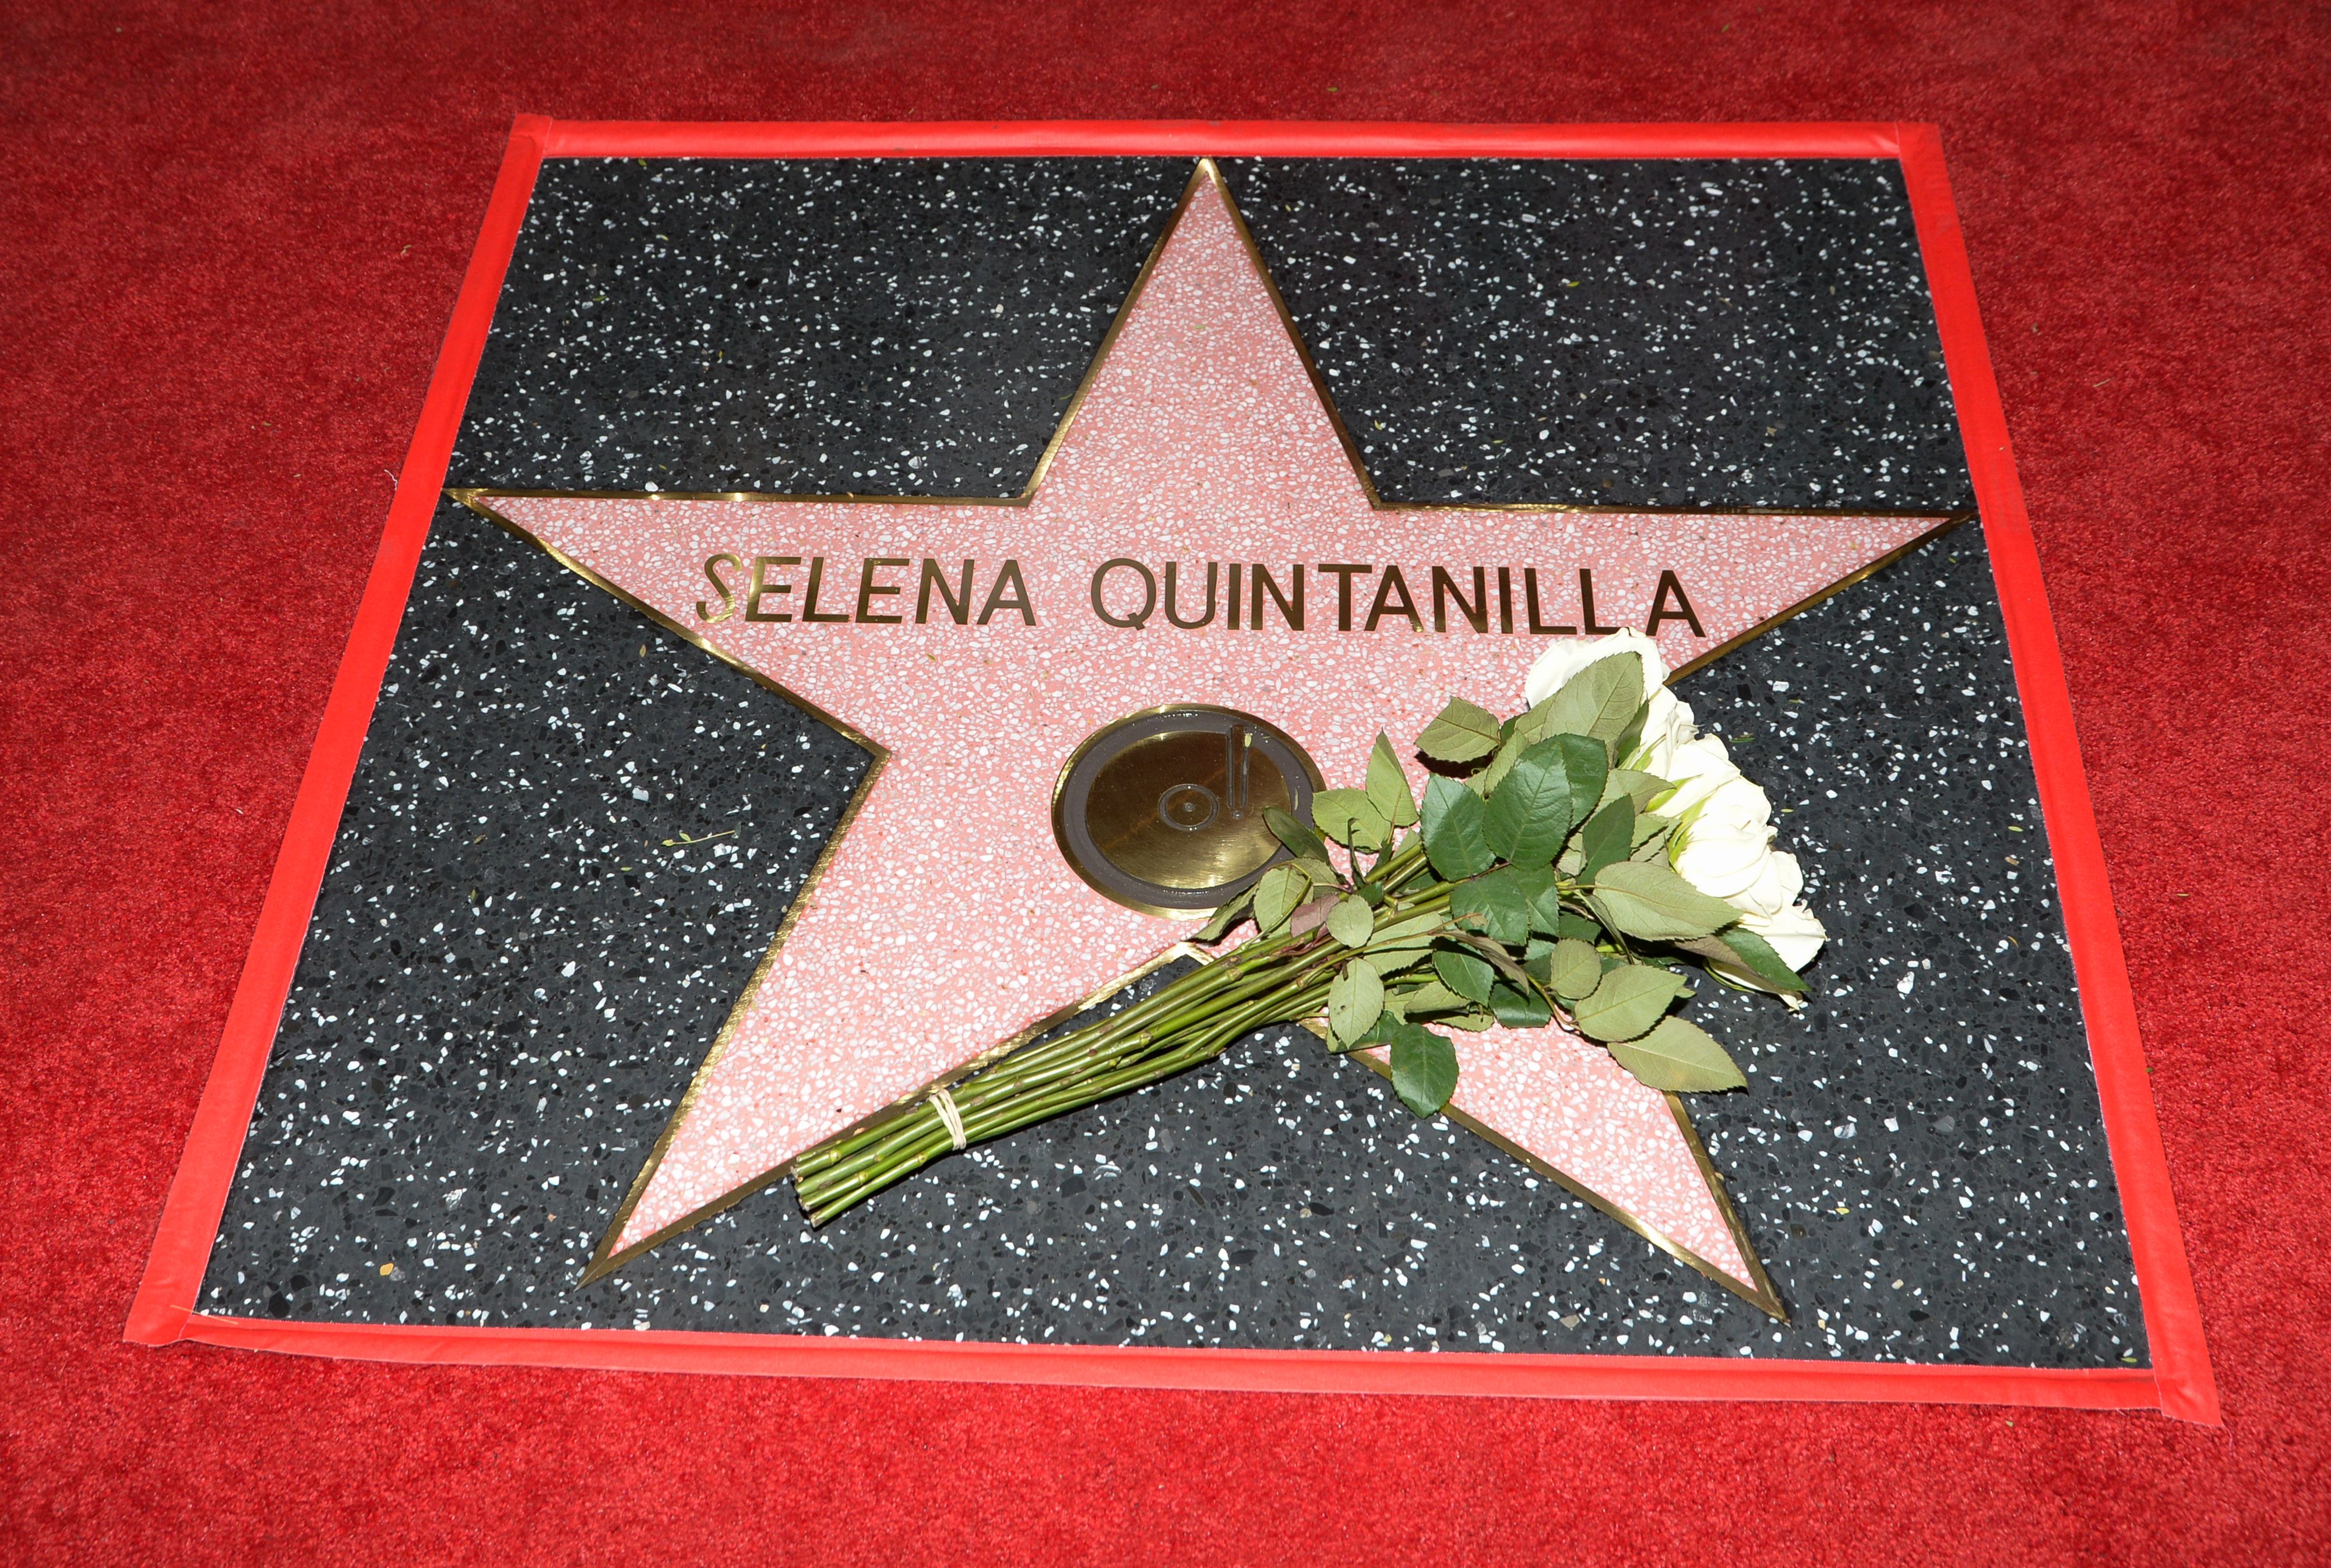 Selena Quintanilla honored posthumously with a star on the Hollywood Walk of Fame in 2017